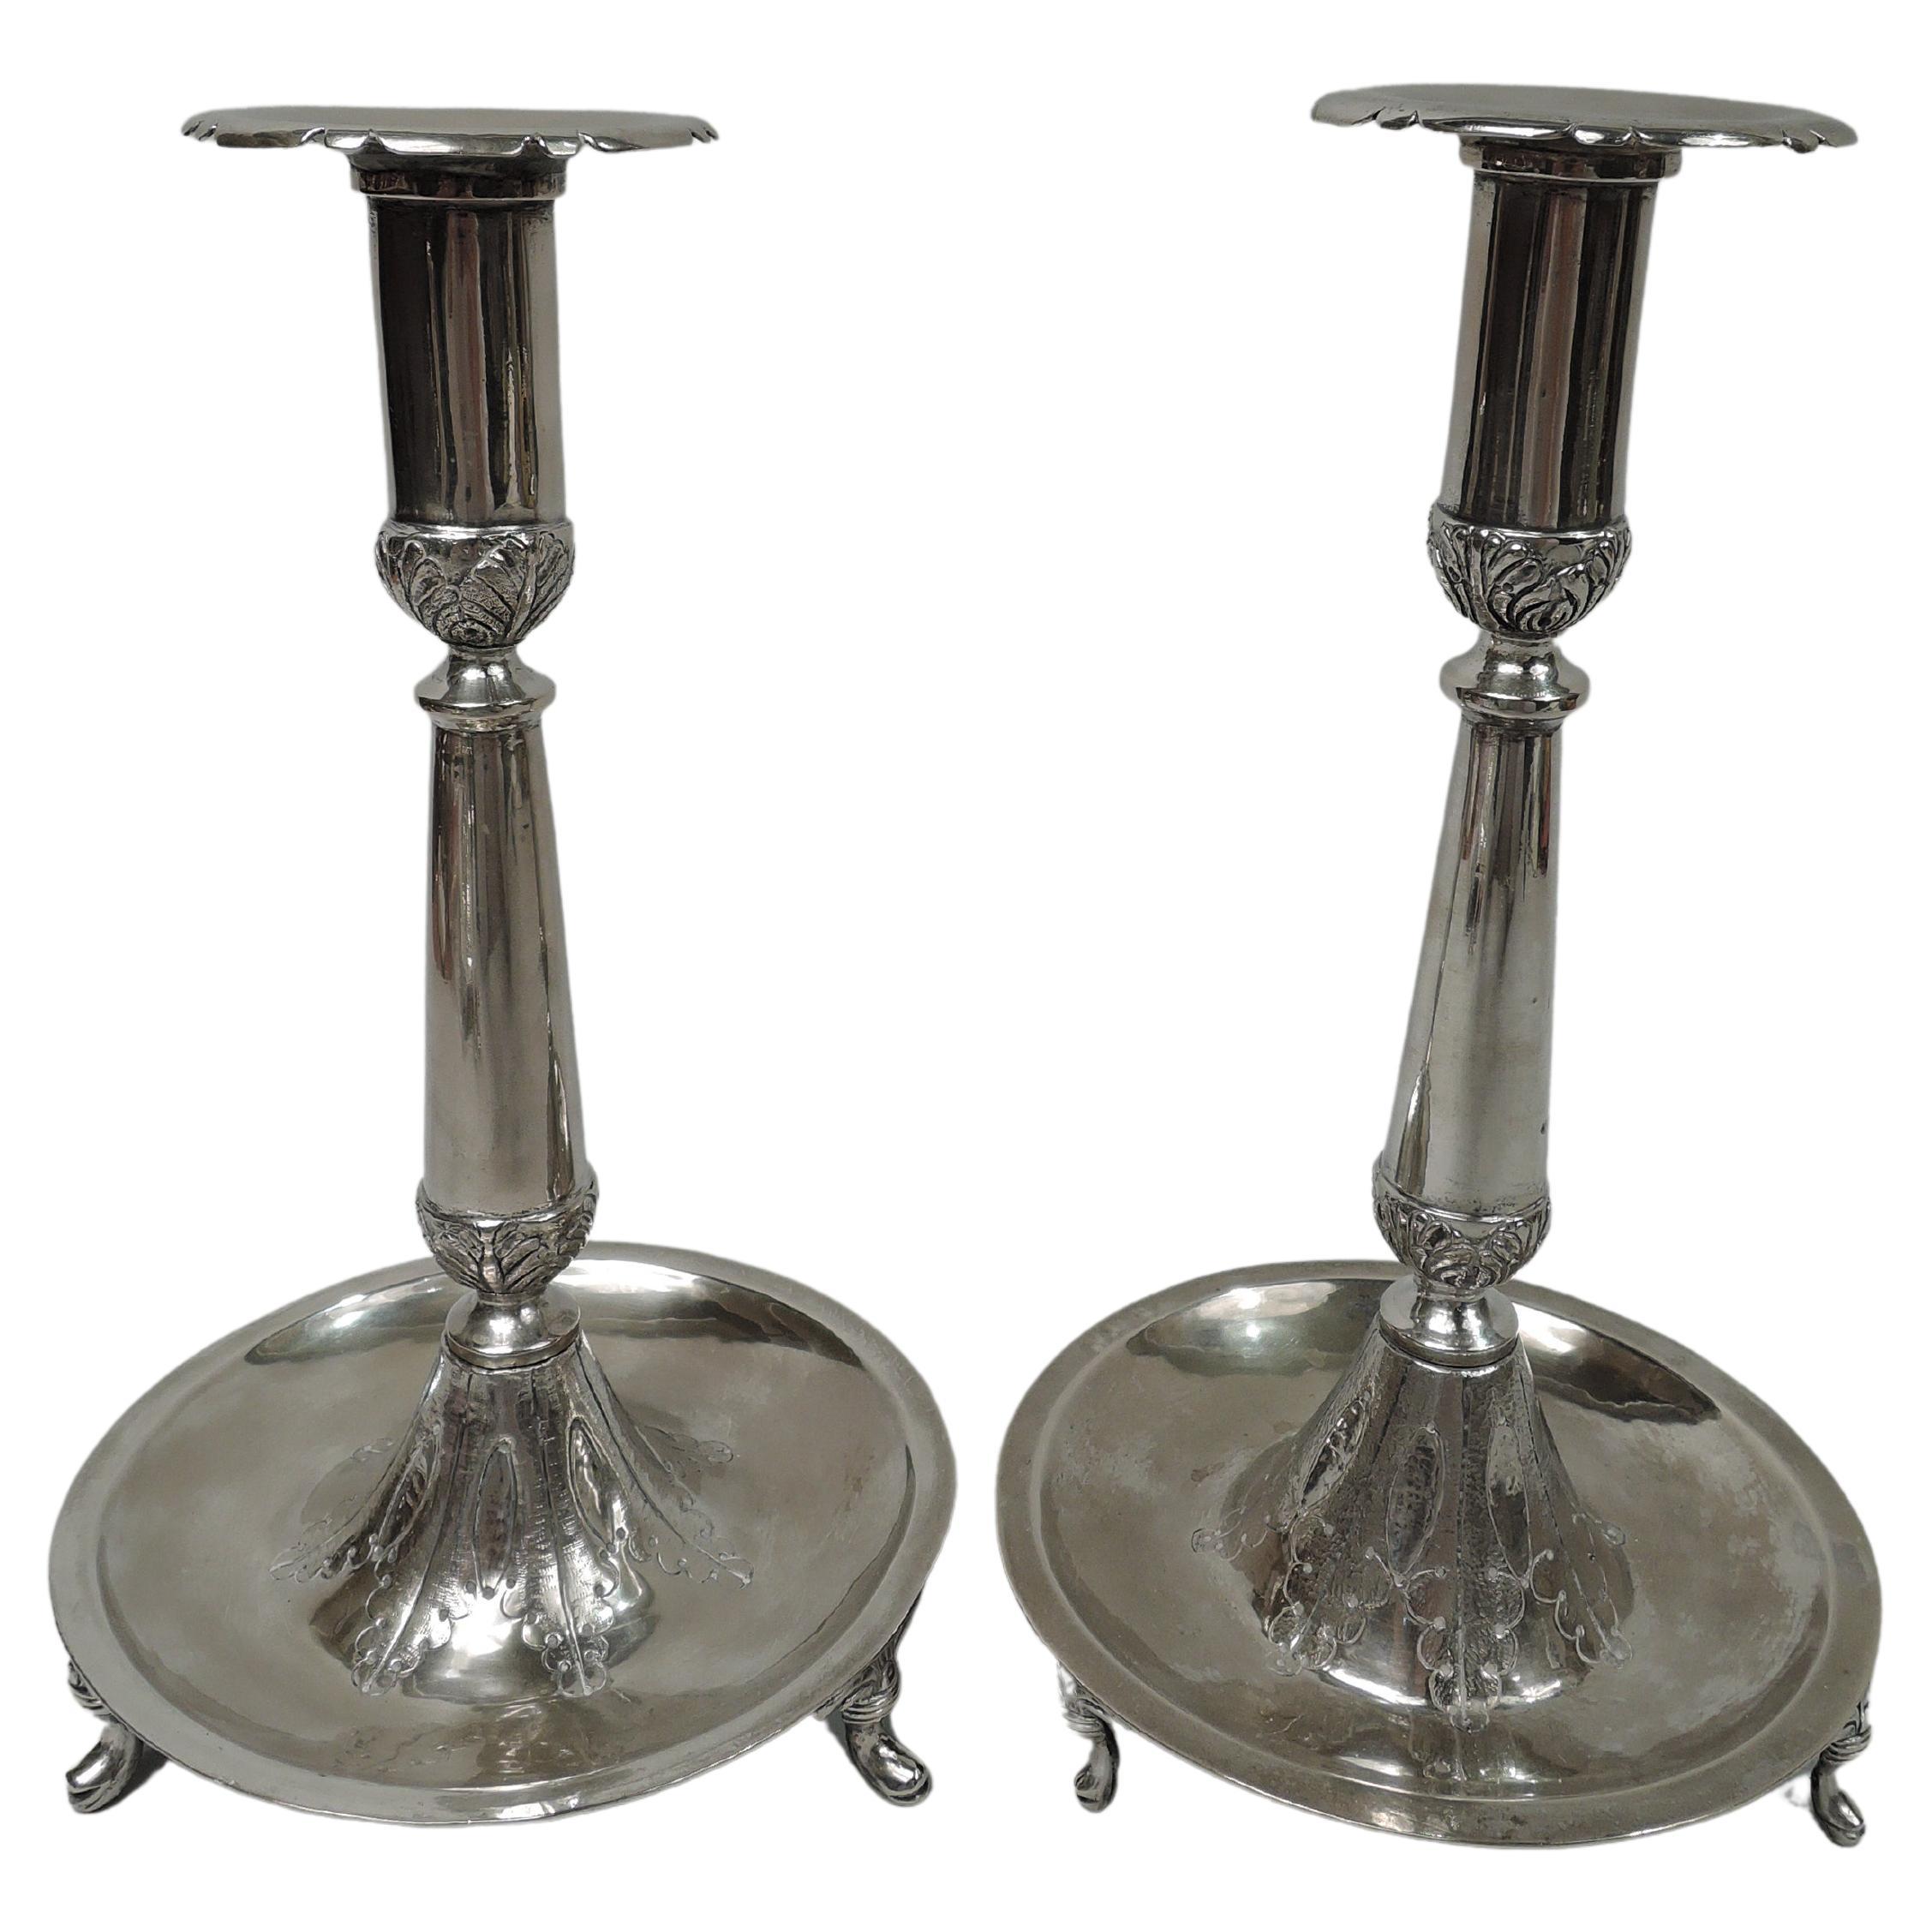 Pair of South American Classical Handmade Silver Candlesticks